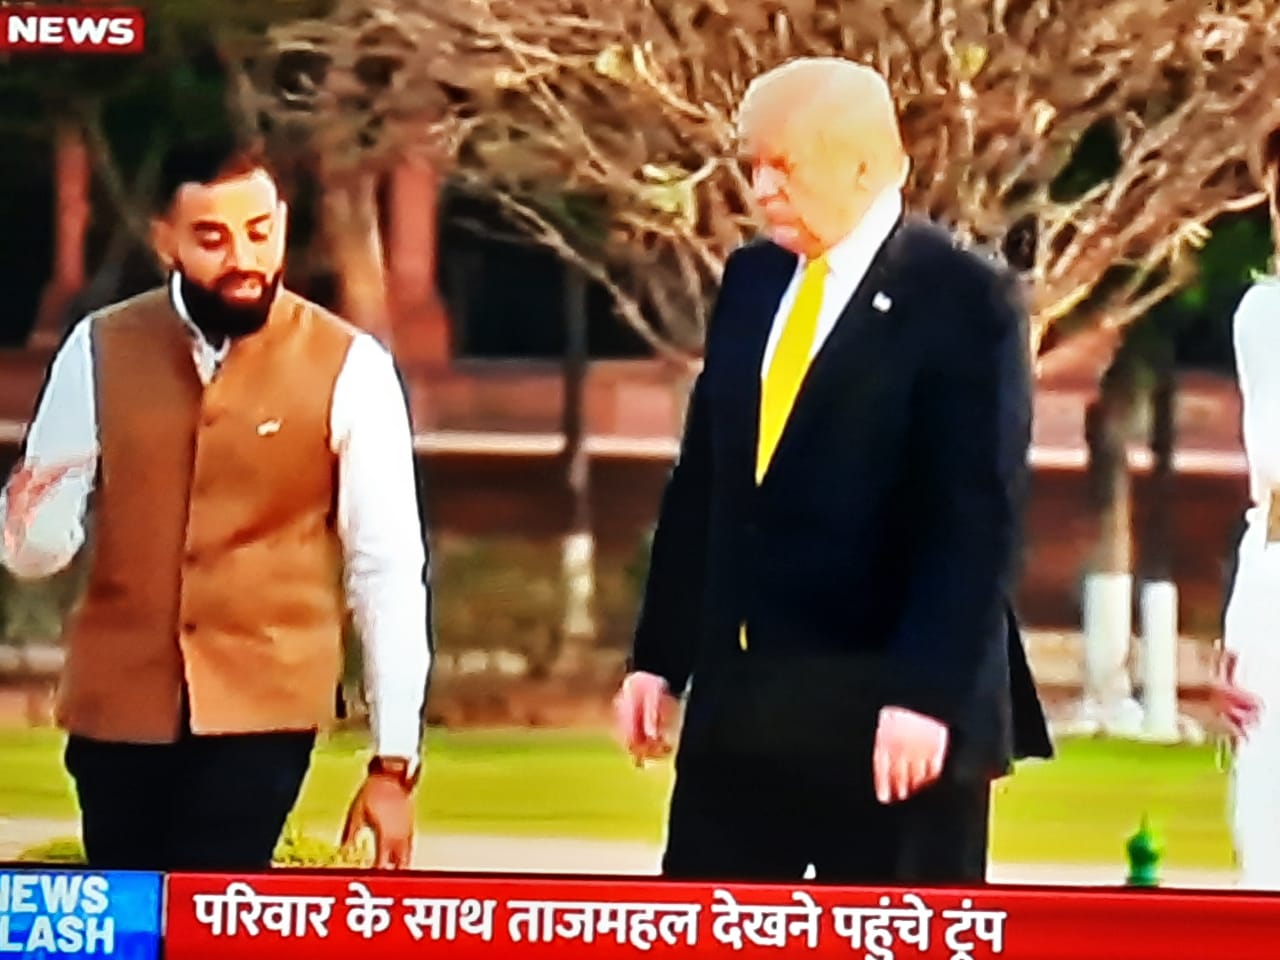 President of United States Donald Trump, with Mr. Nitin Singh, the founder of Taj Calling on a Taj Mahal day tour